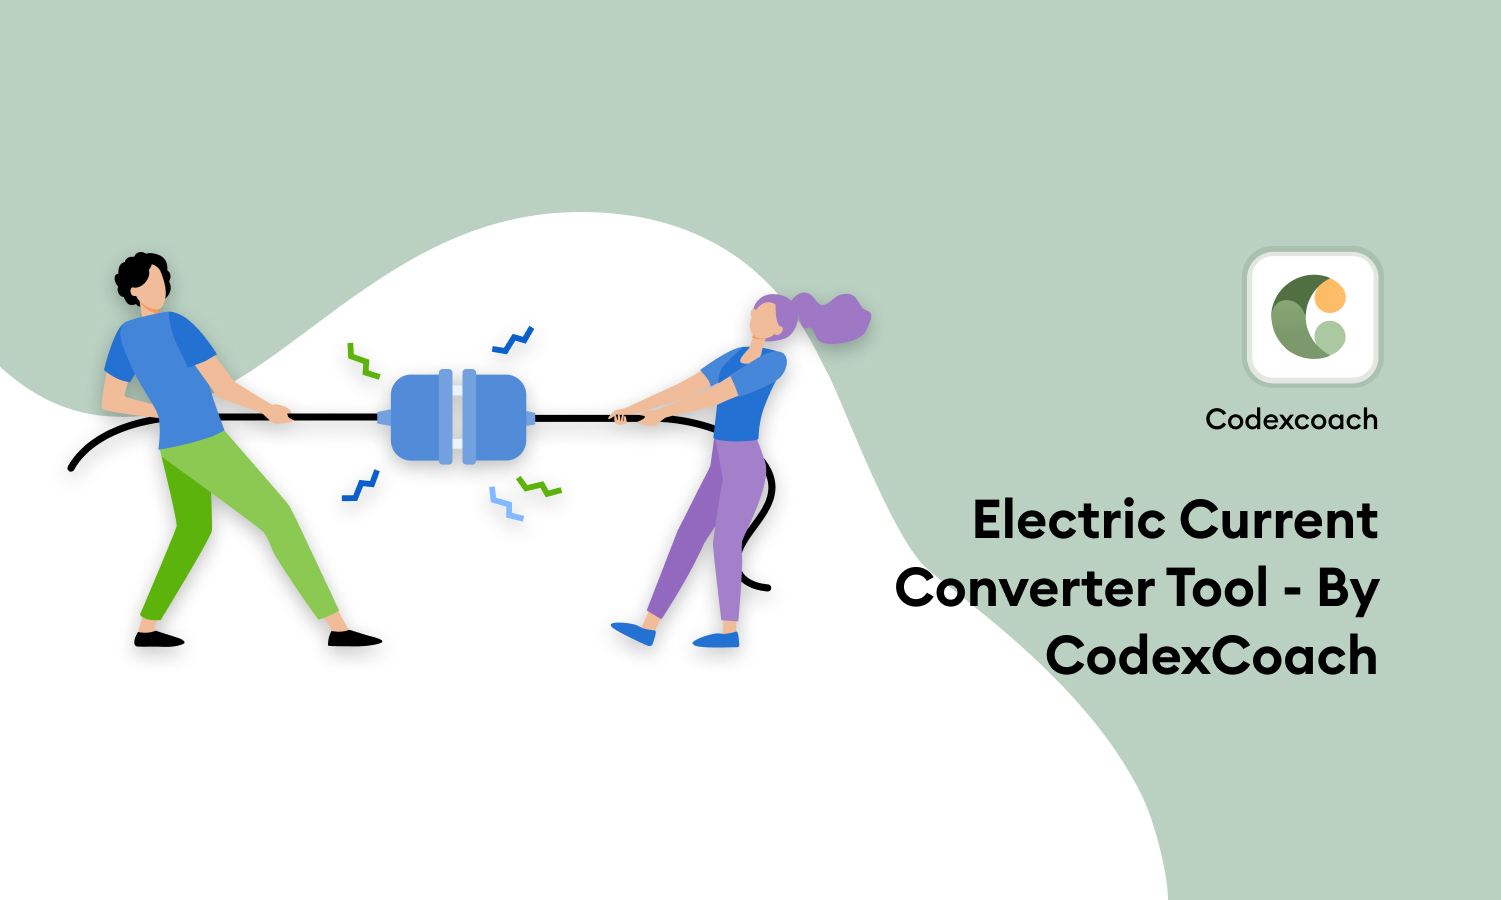 Electric Current Converter